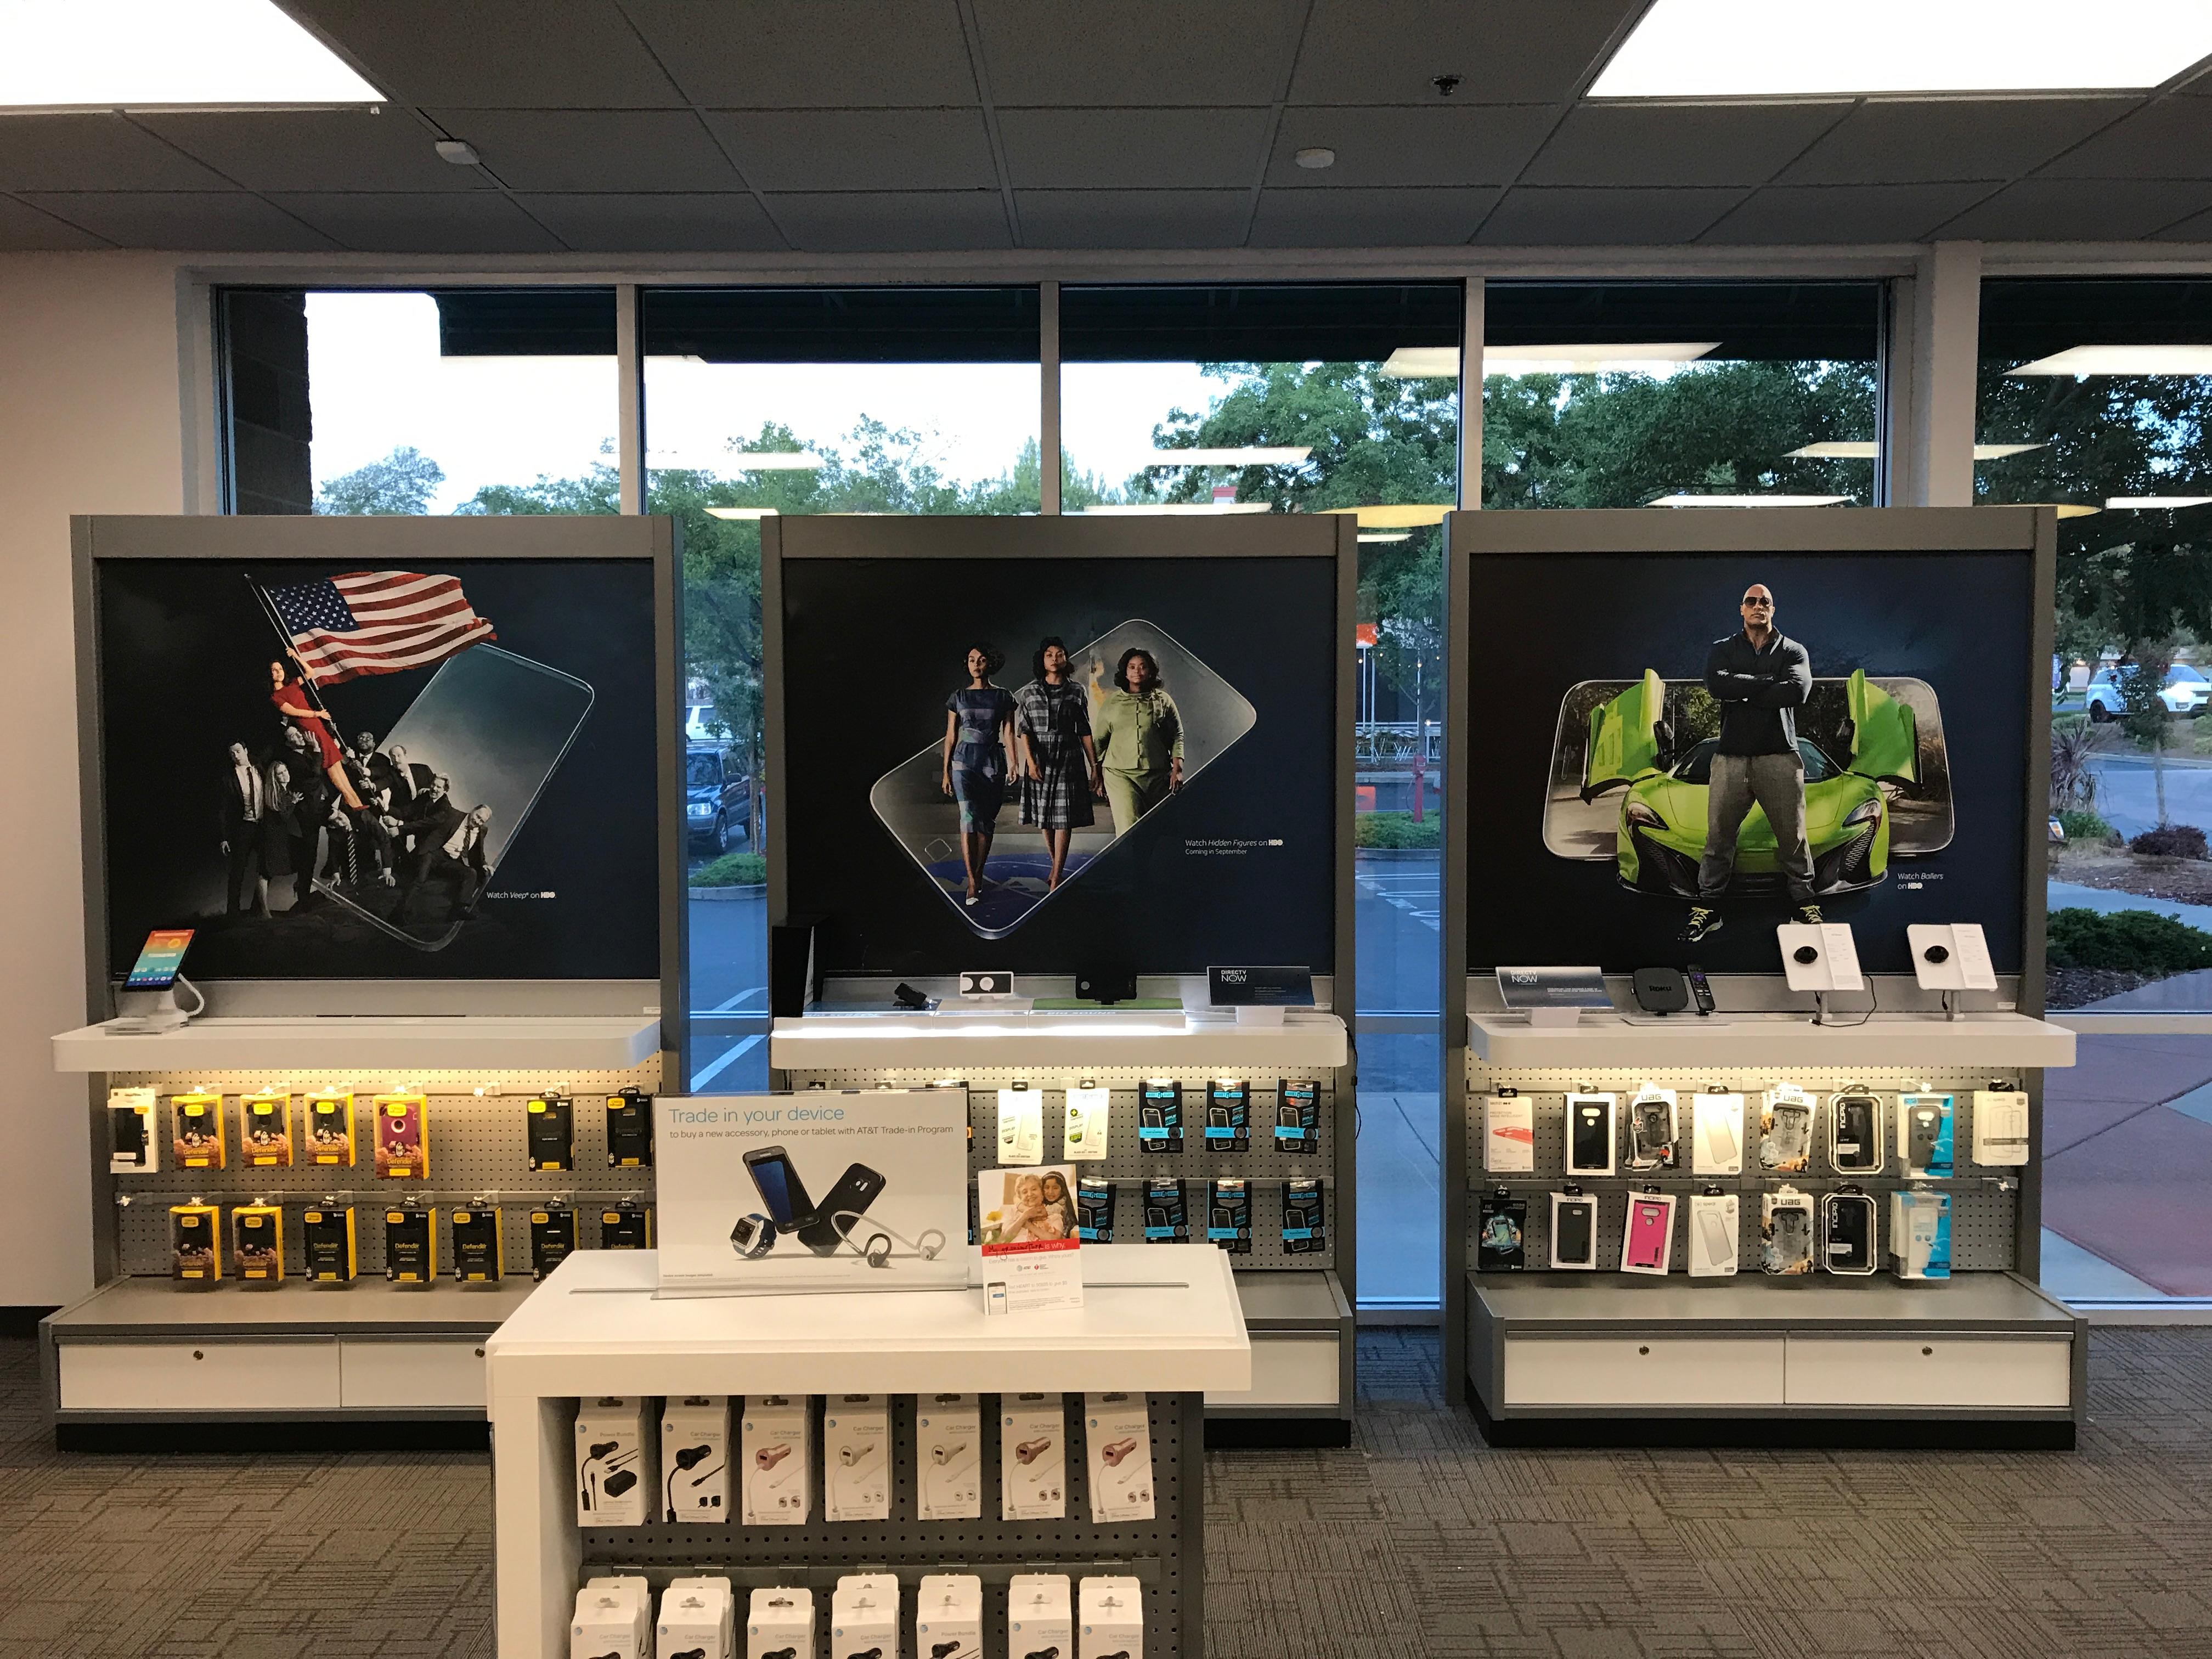 AT&T Store | 6726 Stanford Ranch Rd, Suite 1, Roseville, CA, 95678 | +1 (916) 780-5585